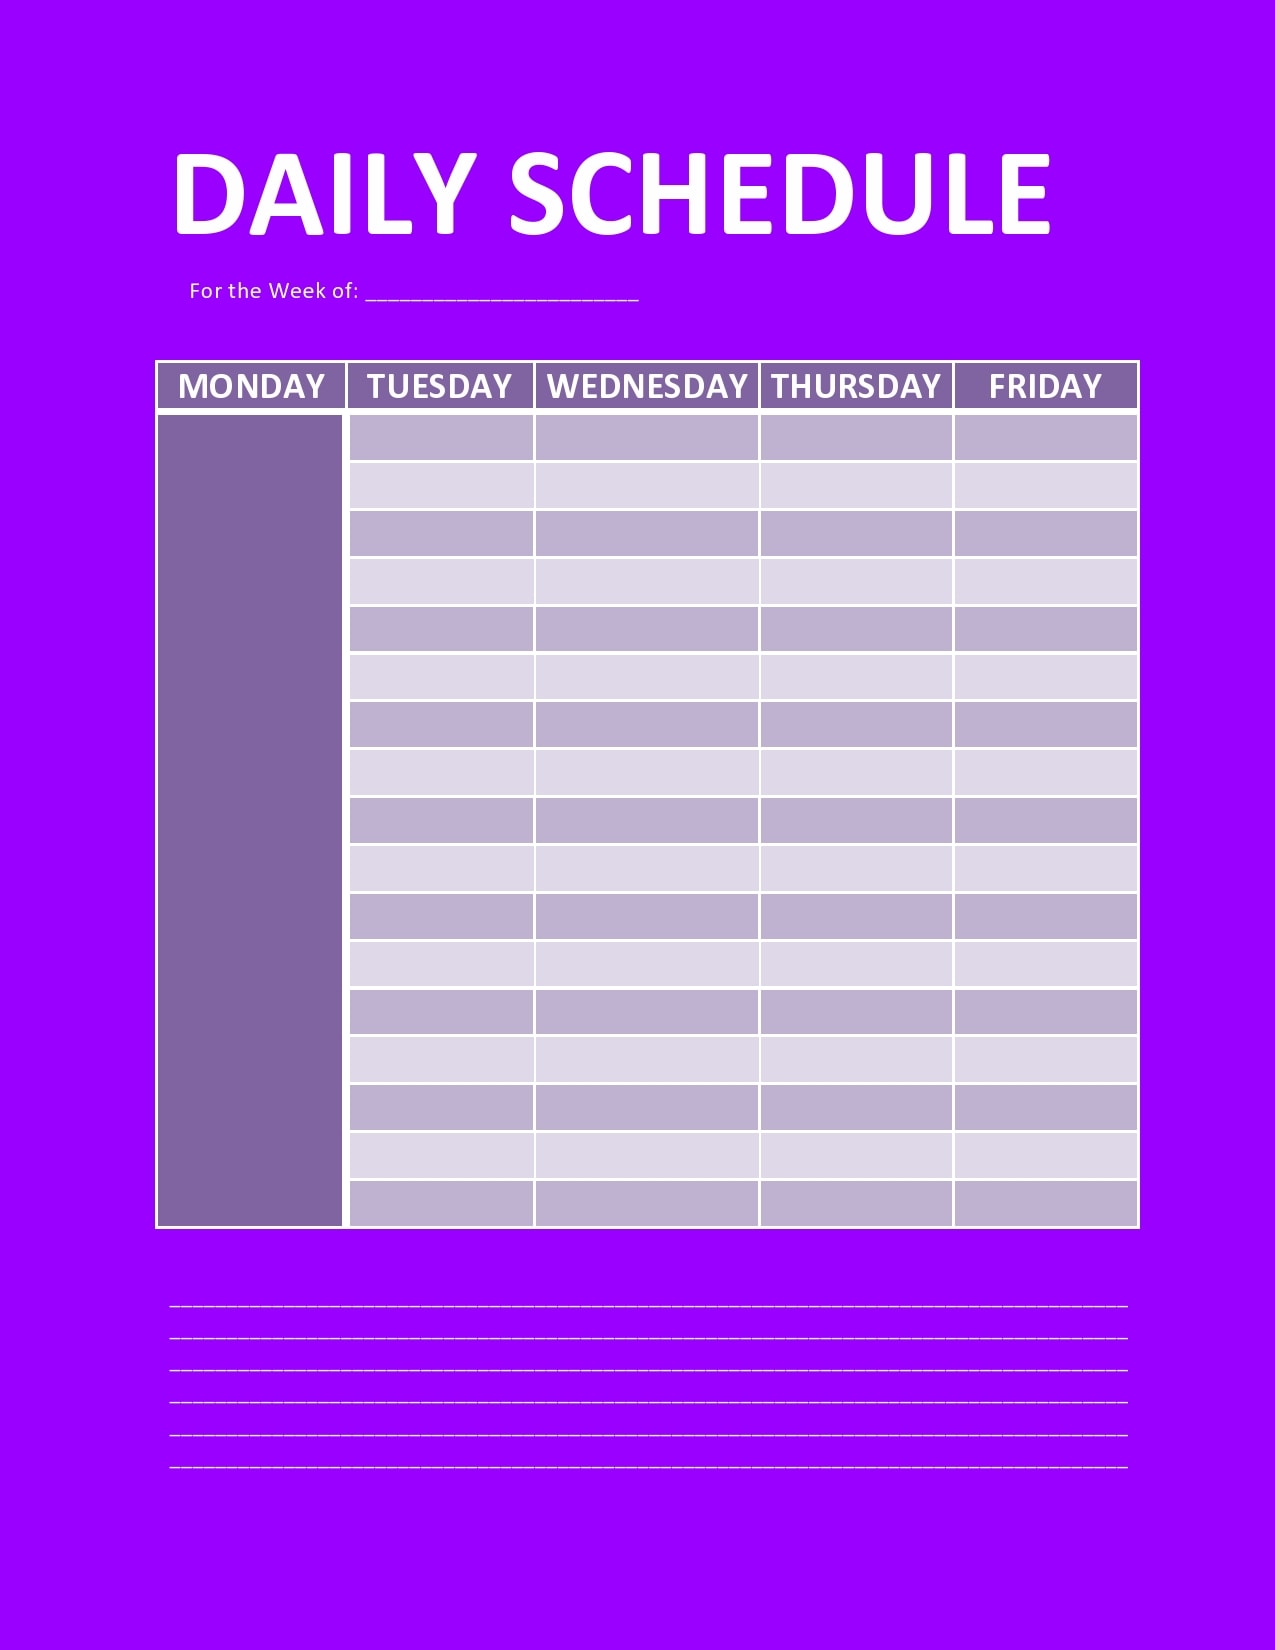 30 Free Daily Schedule Templates (Excel & Word) - TemplateArchive